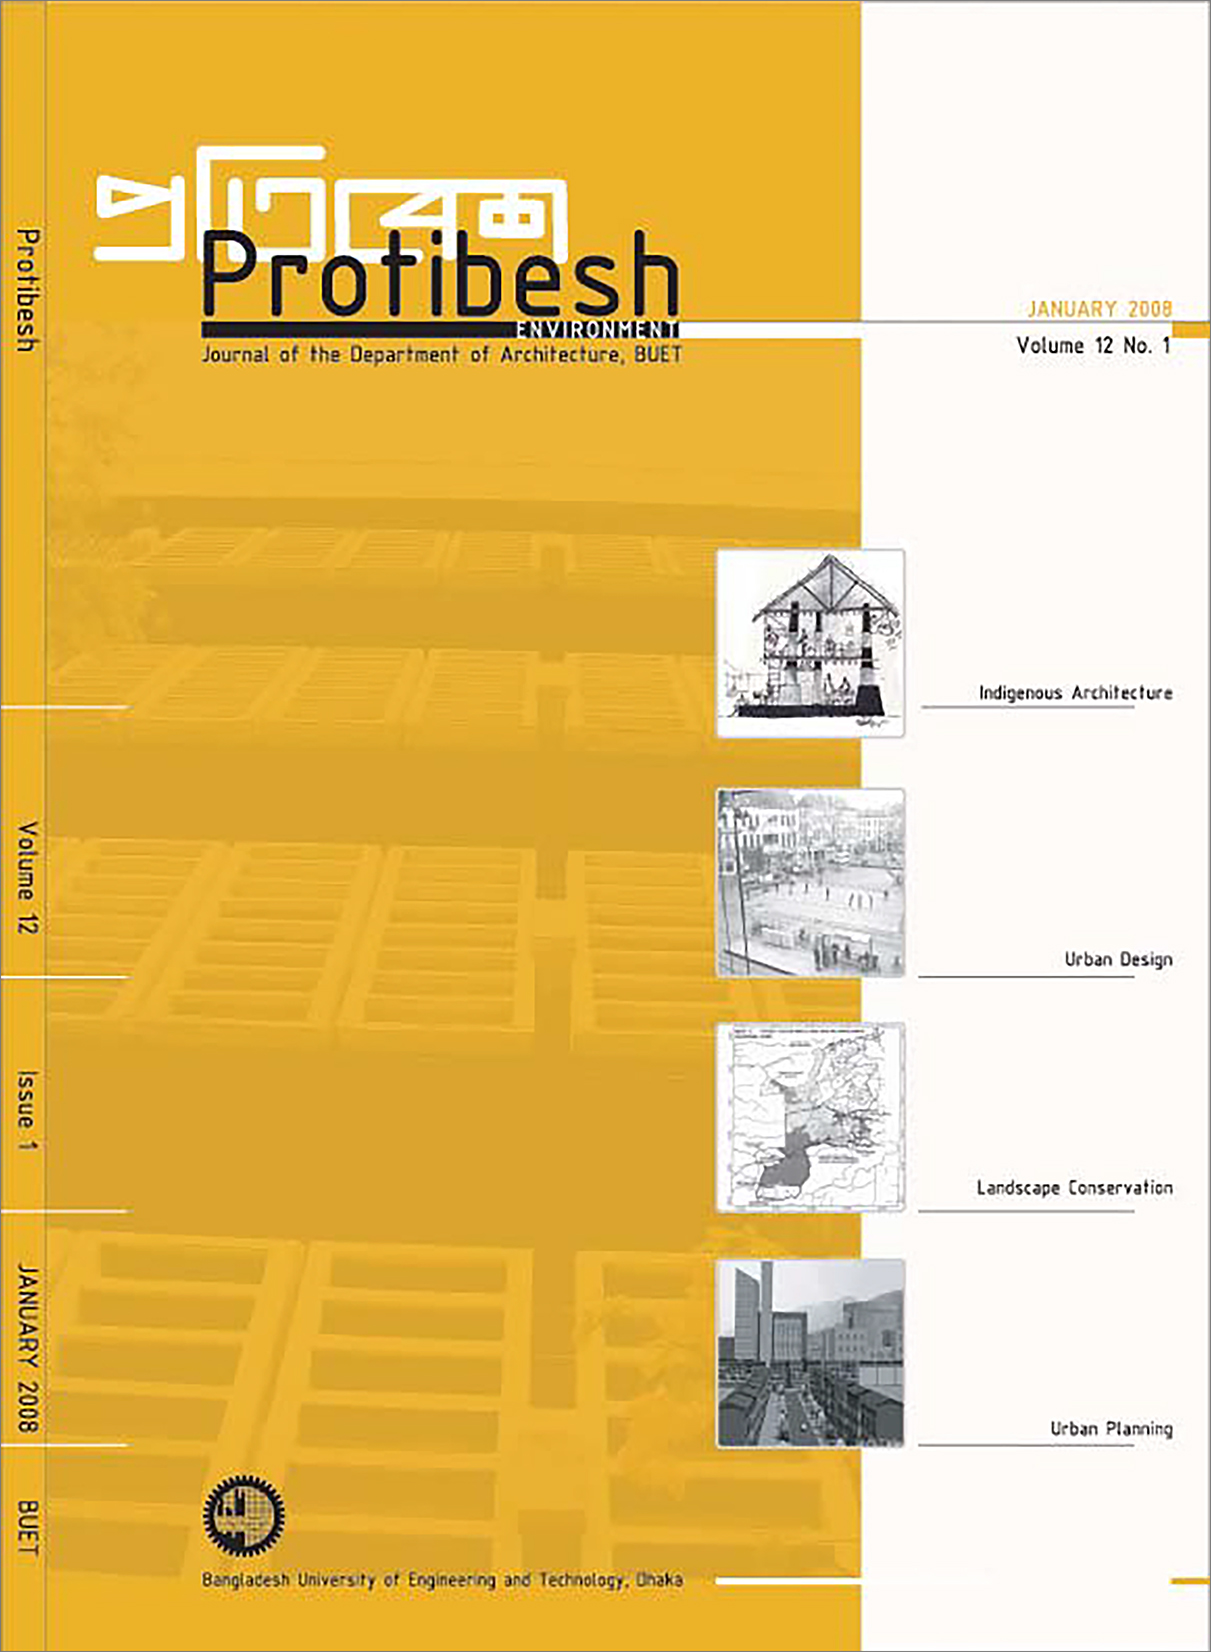 Cover image of Protibesh Vol-12 No-01 January-2008 - Journal of the Department of Architecture, BUET